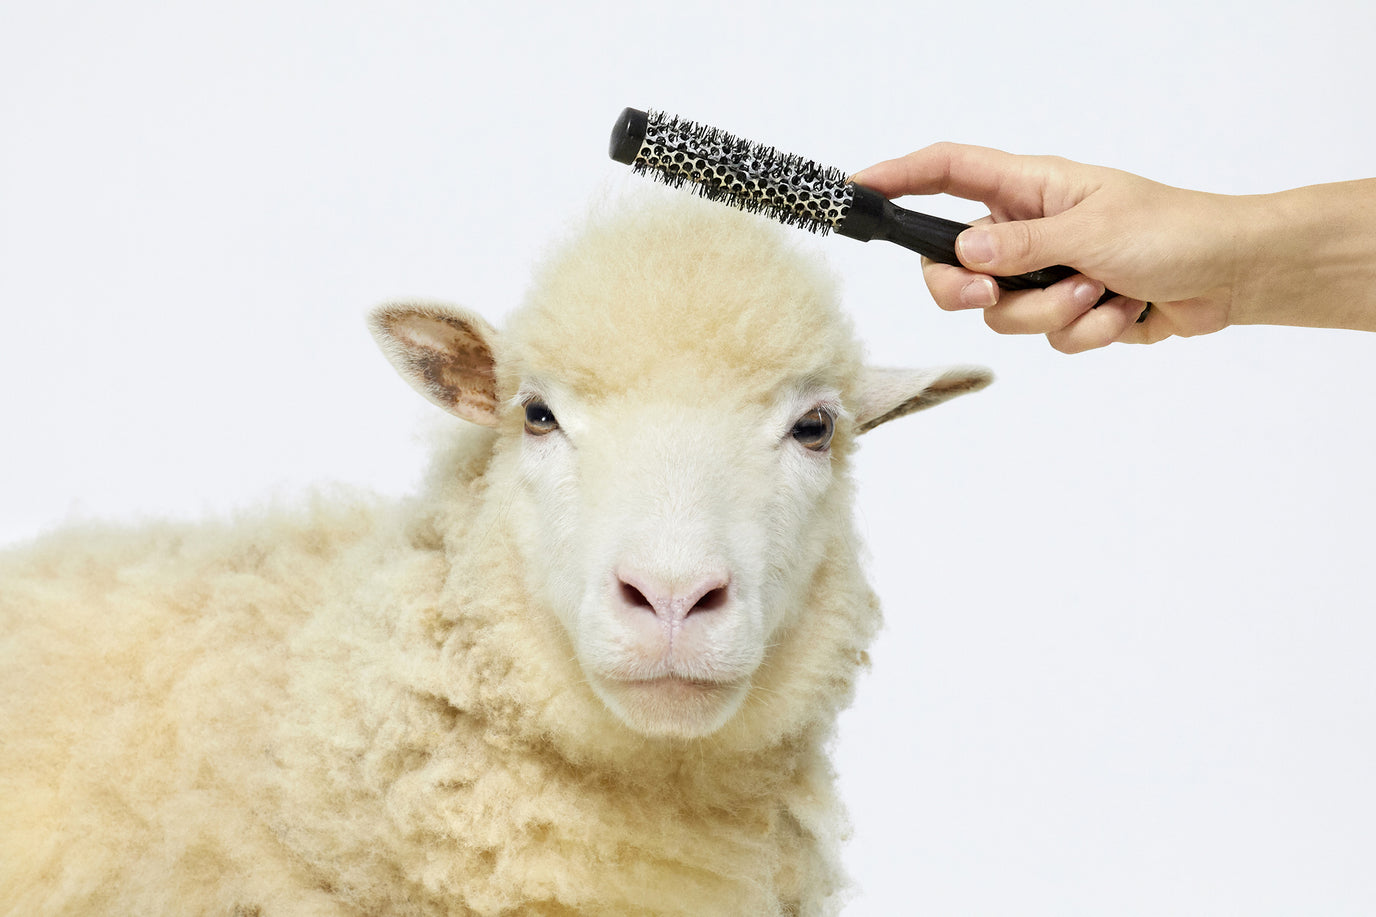 Ethical and sustainable merino wool